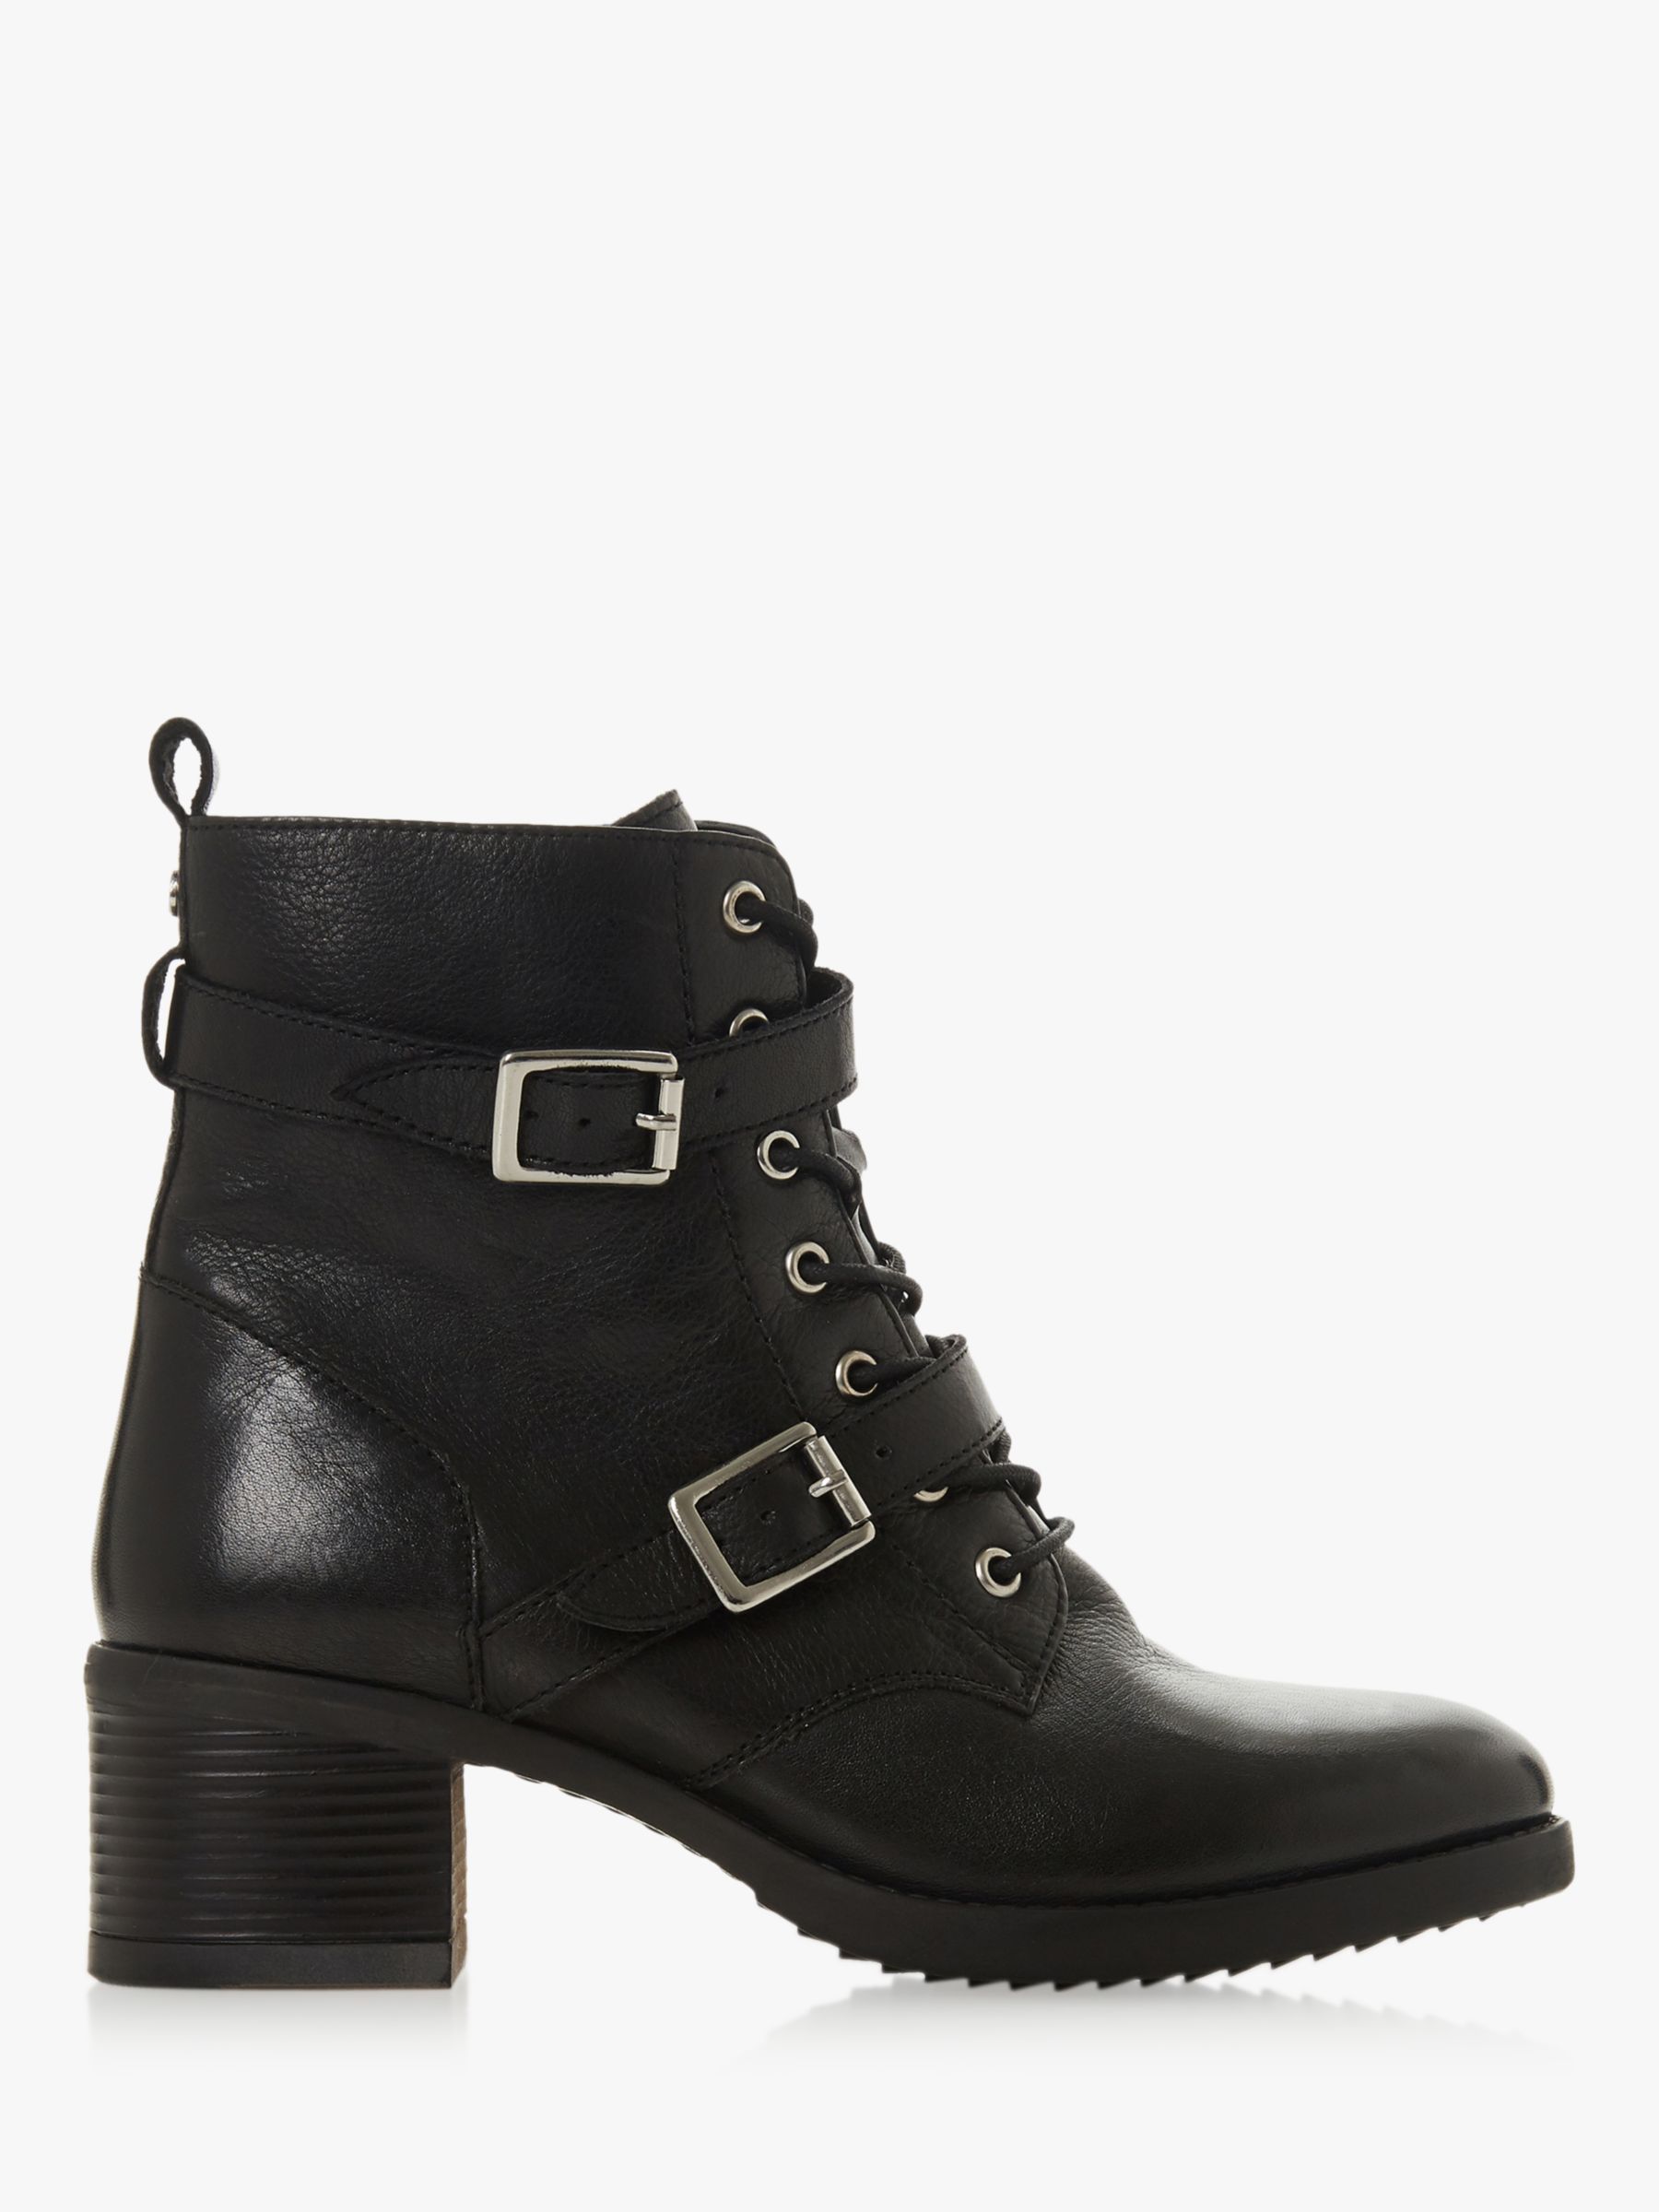 Dune Paxtone Buckle Lace Ankle Boots, Black Leather at John Lewis ...